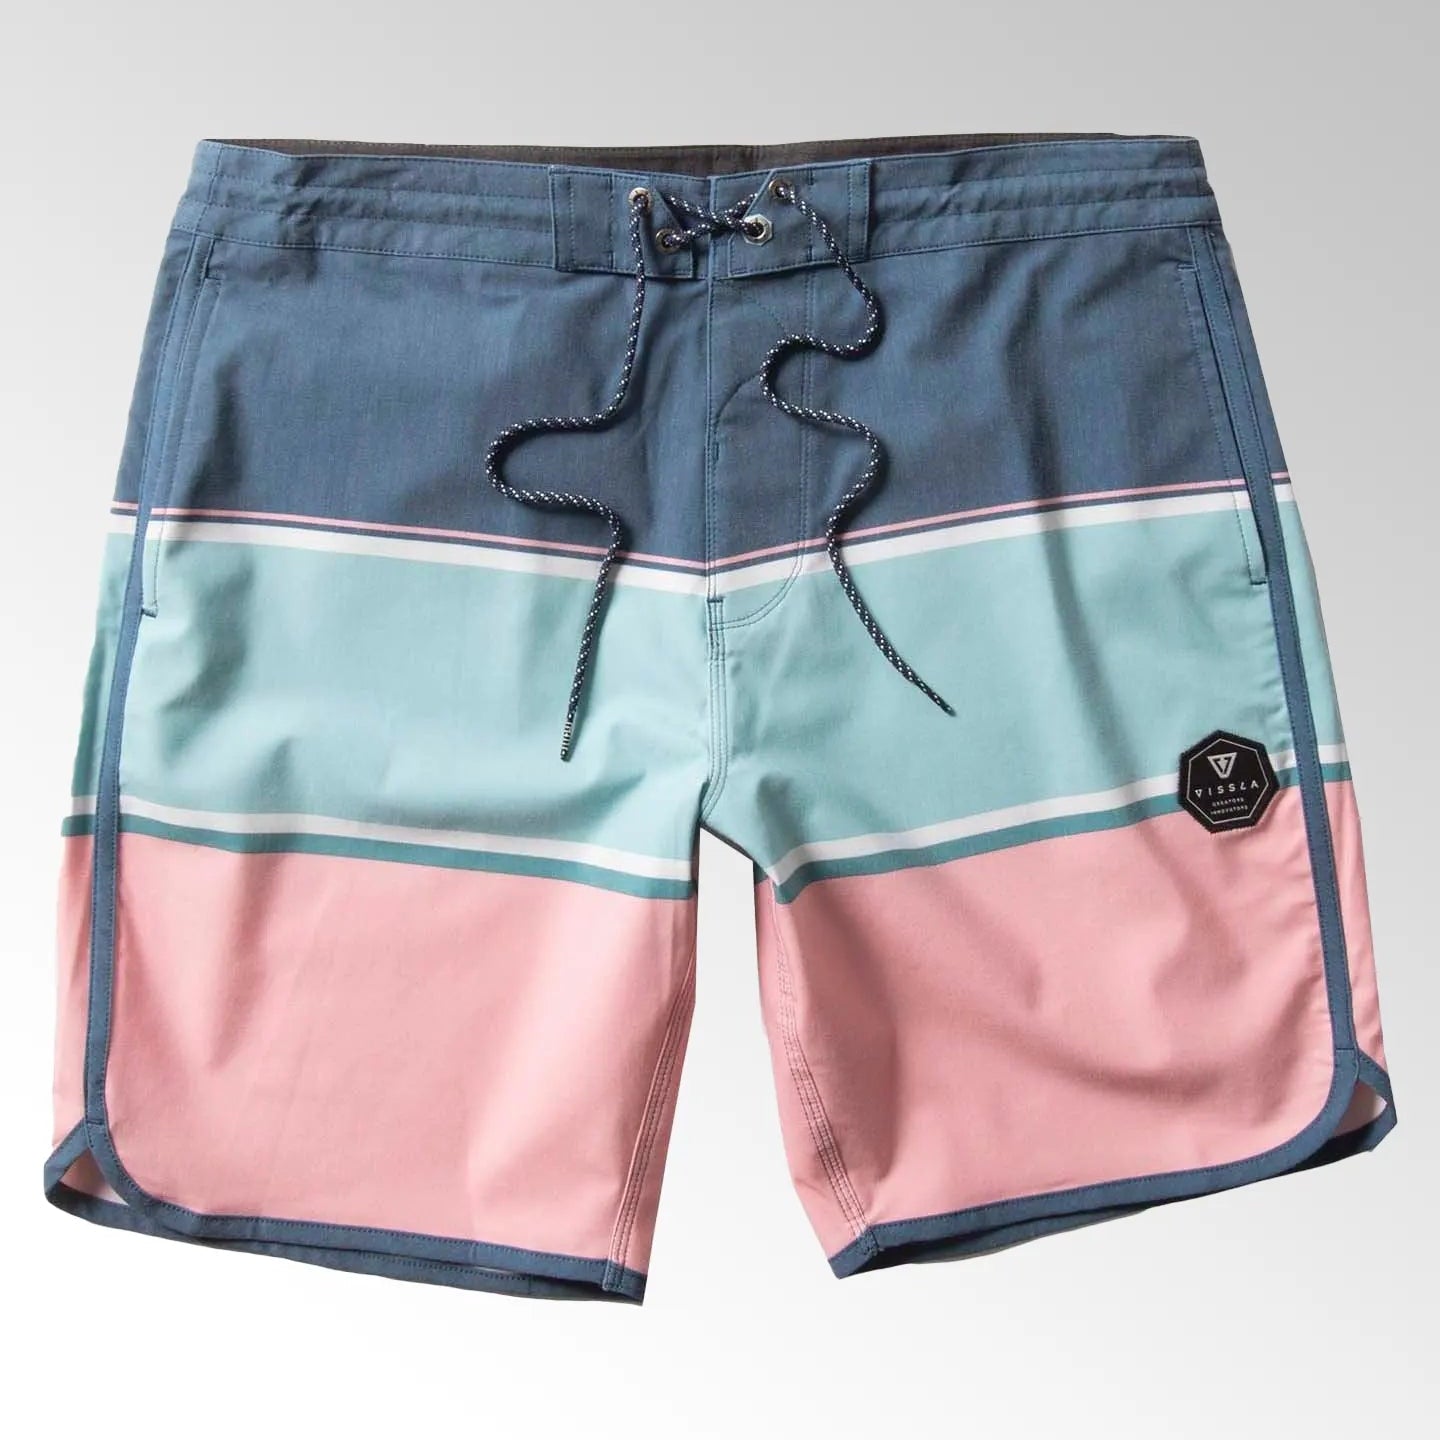 The Point 19.5" Boardshort Pacific Blue - The Good Chic